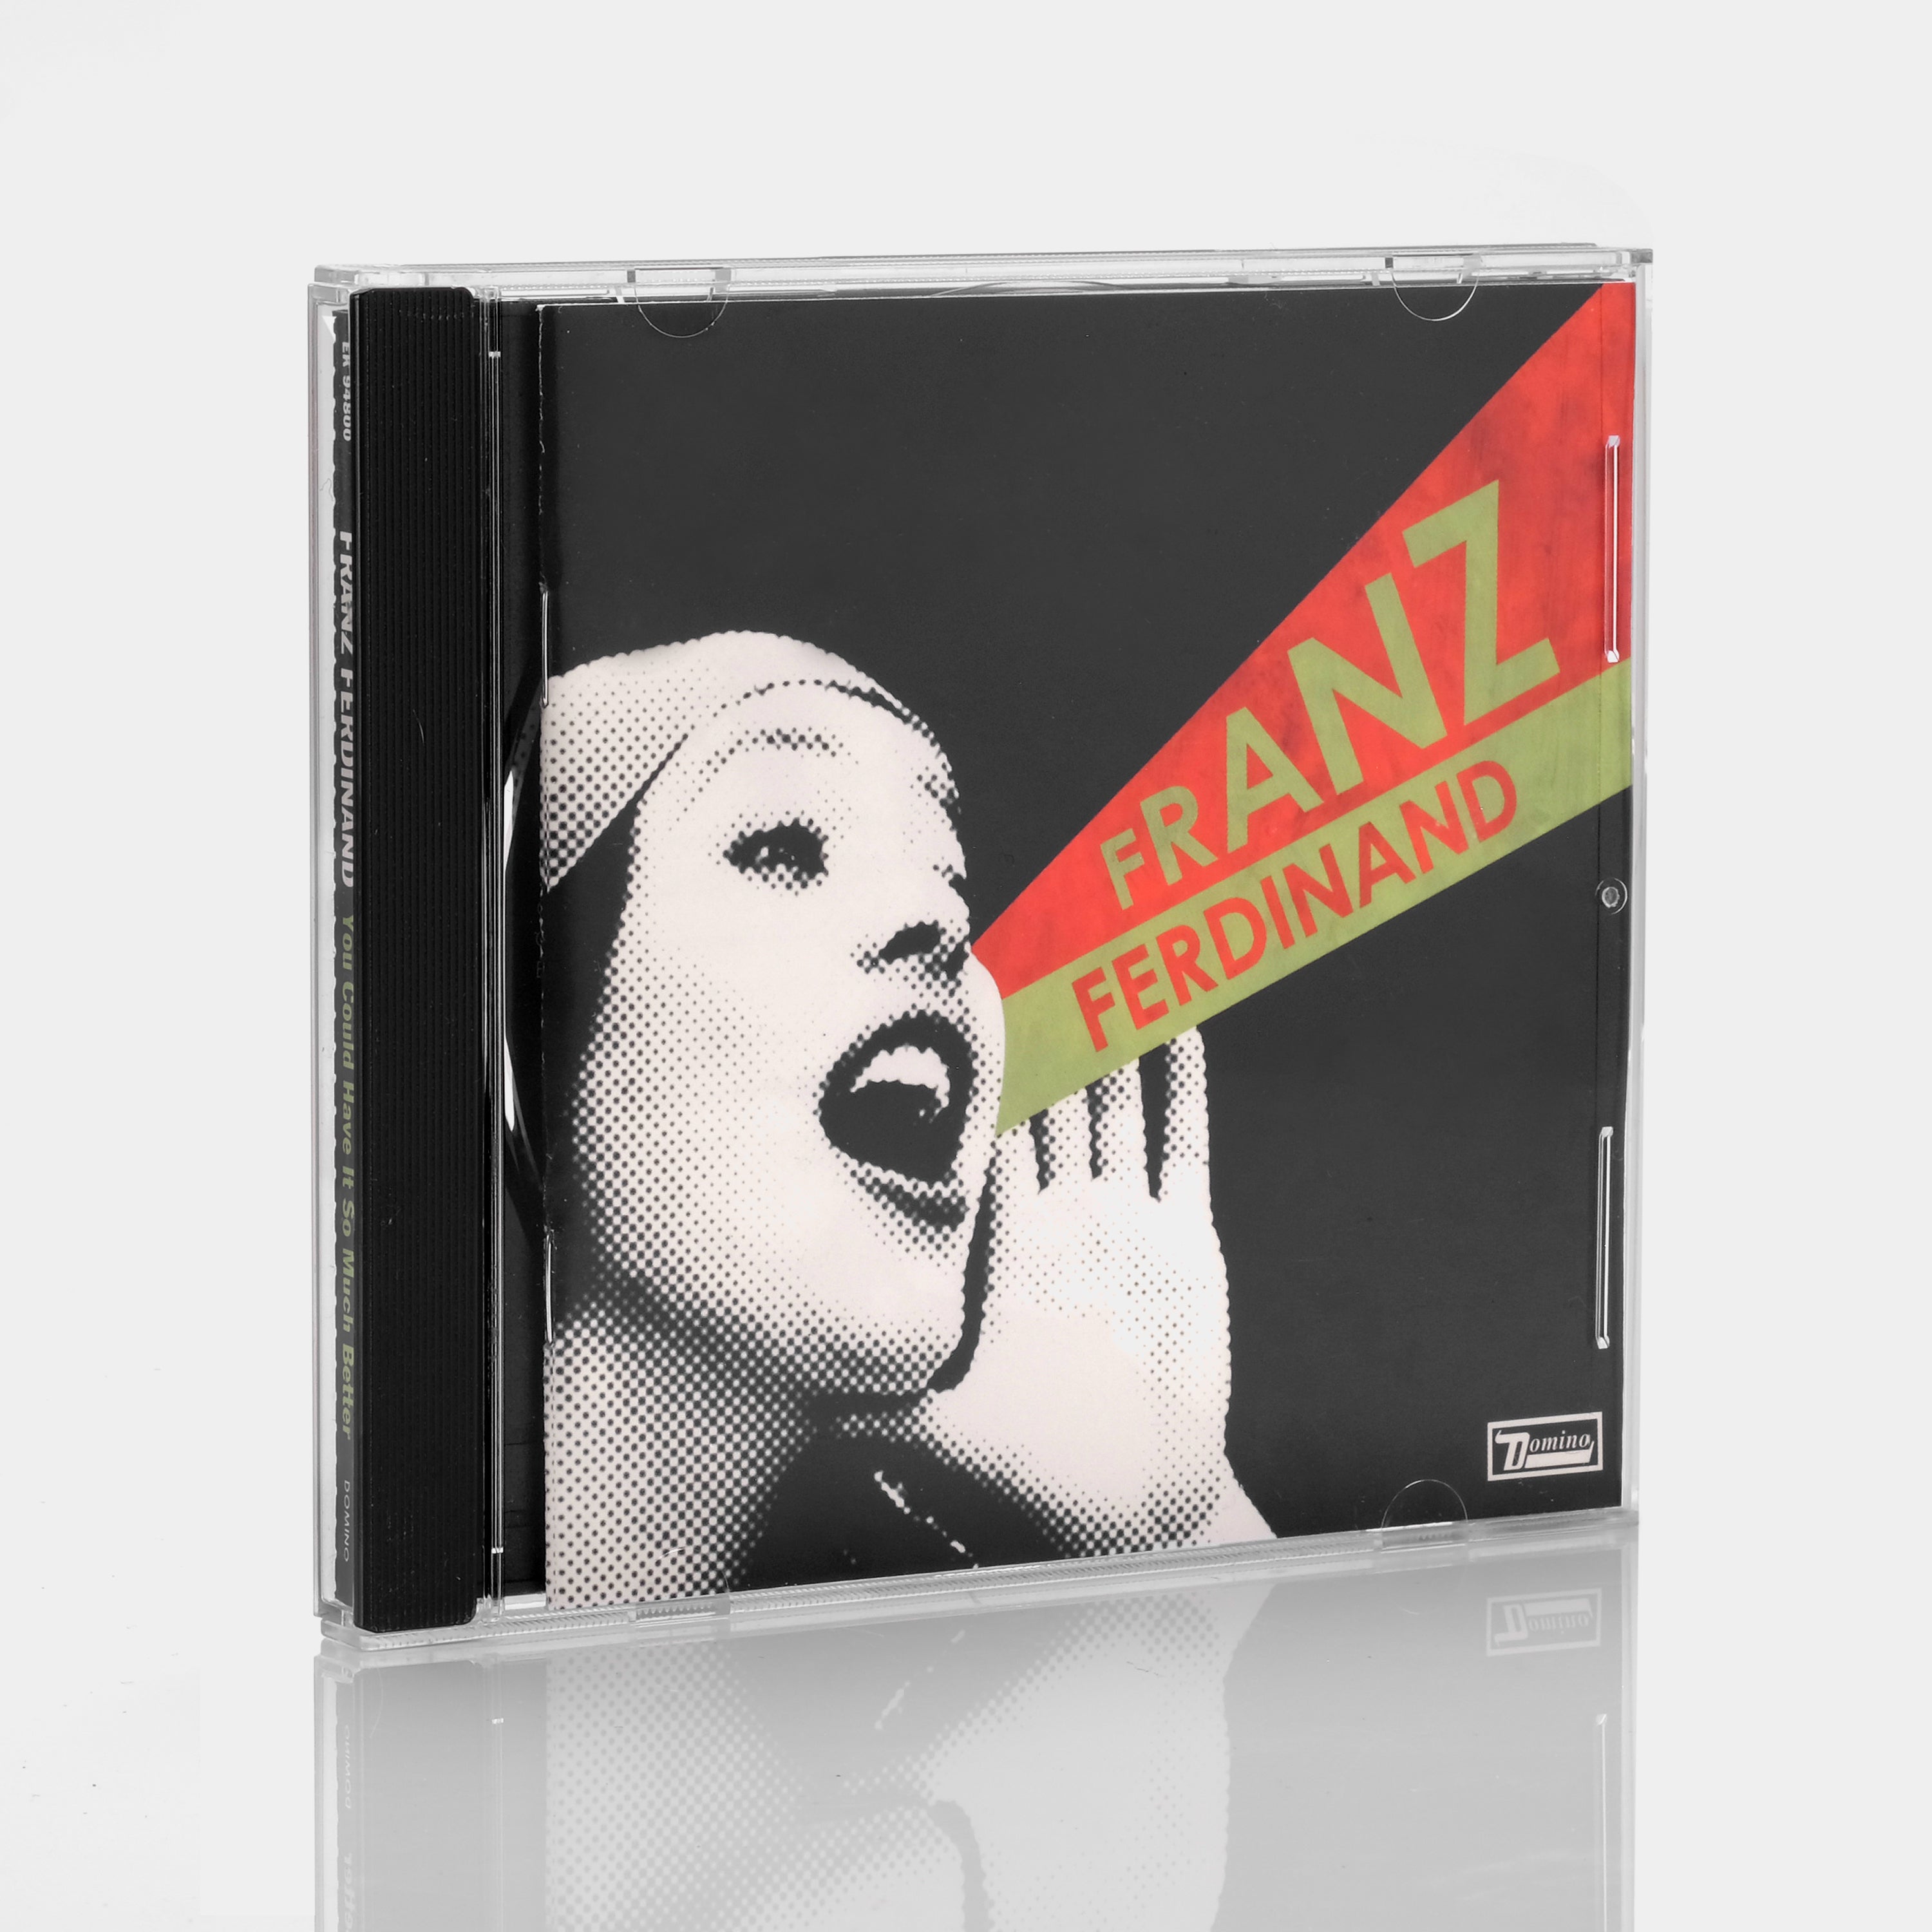 Franz Ferdinand - You Could Have It So Much Better CD